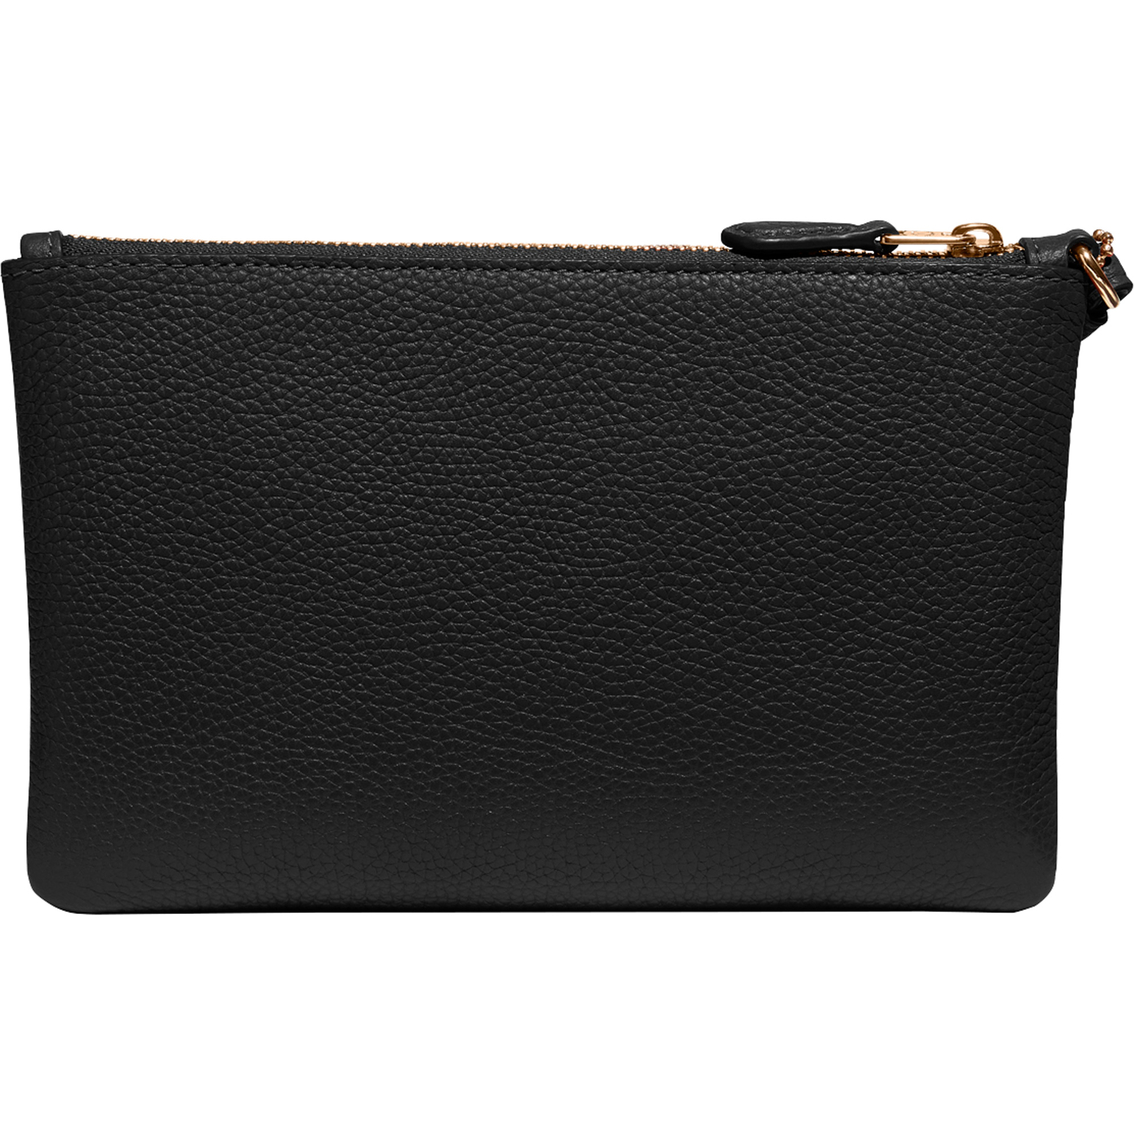 COACH Small Wristlet - Image 2 of 3